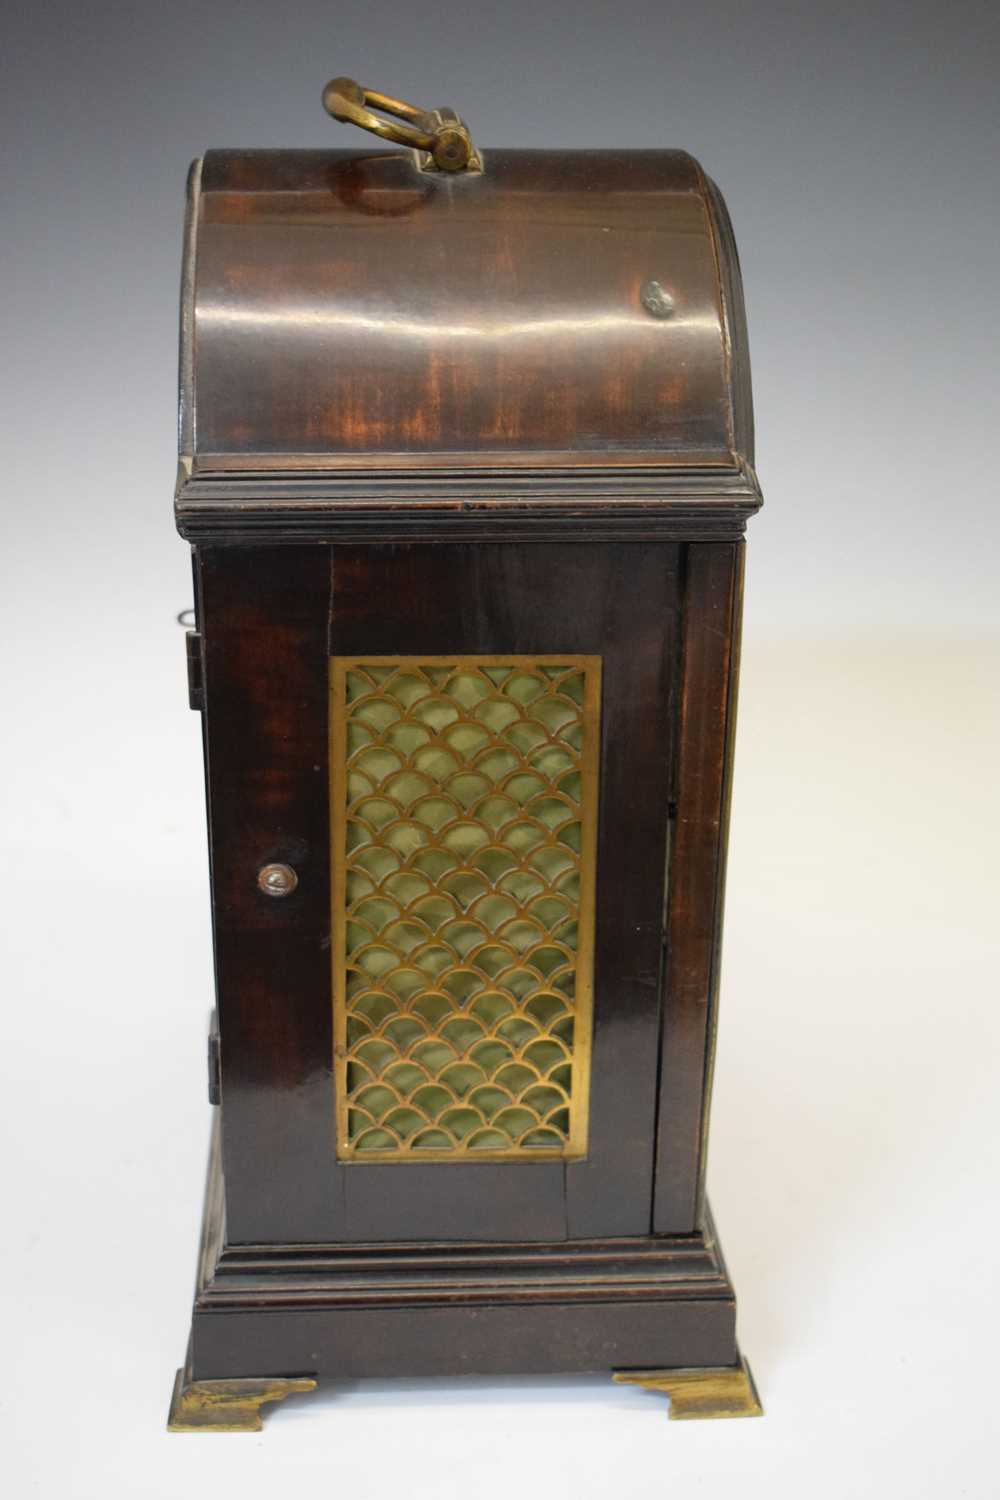 Early 19th century mahogany twin fusée bracket clock with pull repeat, Barrauds, Cornhill No. 563 - Image 13 of 16